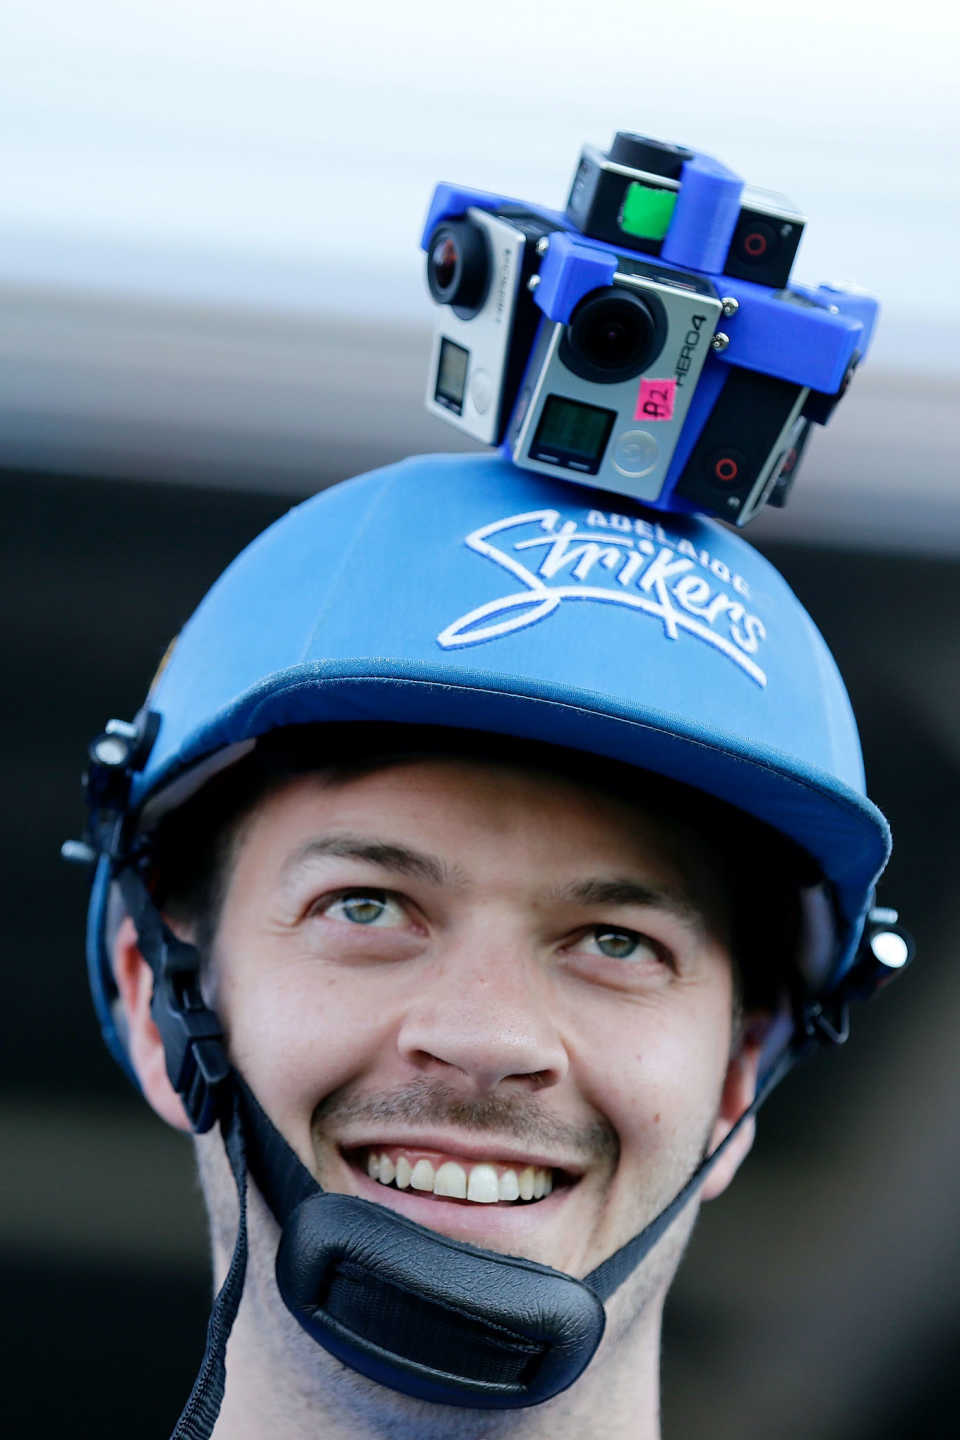 Hamish Kingston wears a helmet with gopros attached, Perth Scorchers vs Adelaide Strikers, BBL 2016, Perth, December 23, 2016 